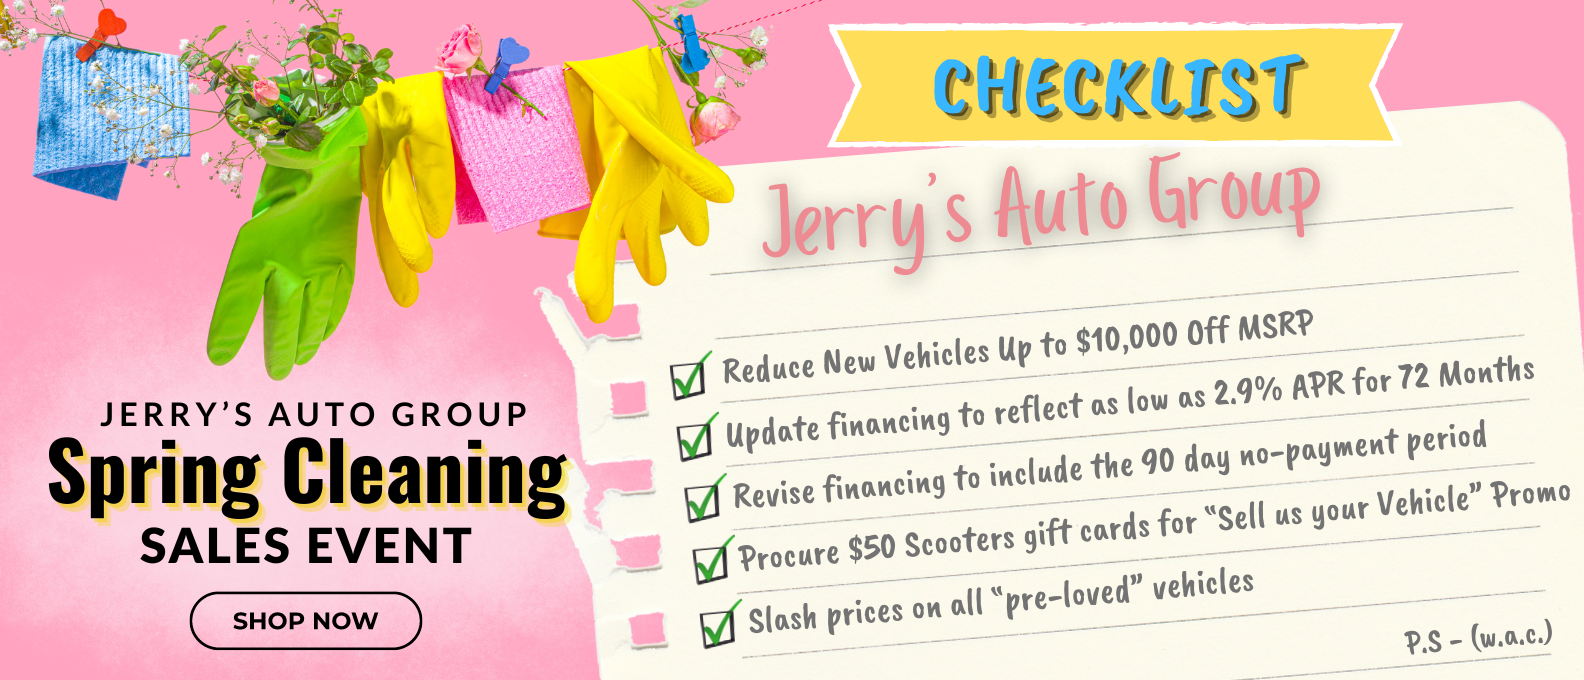 Spring Cleaning Sales Event at Jerry's Auto Group